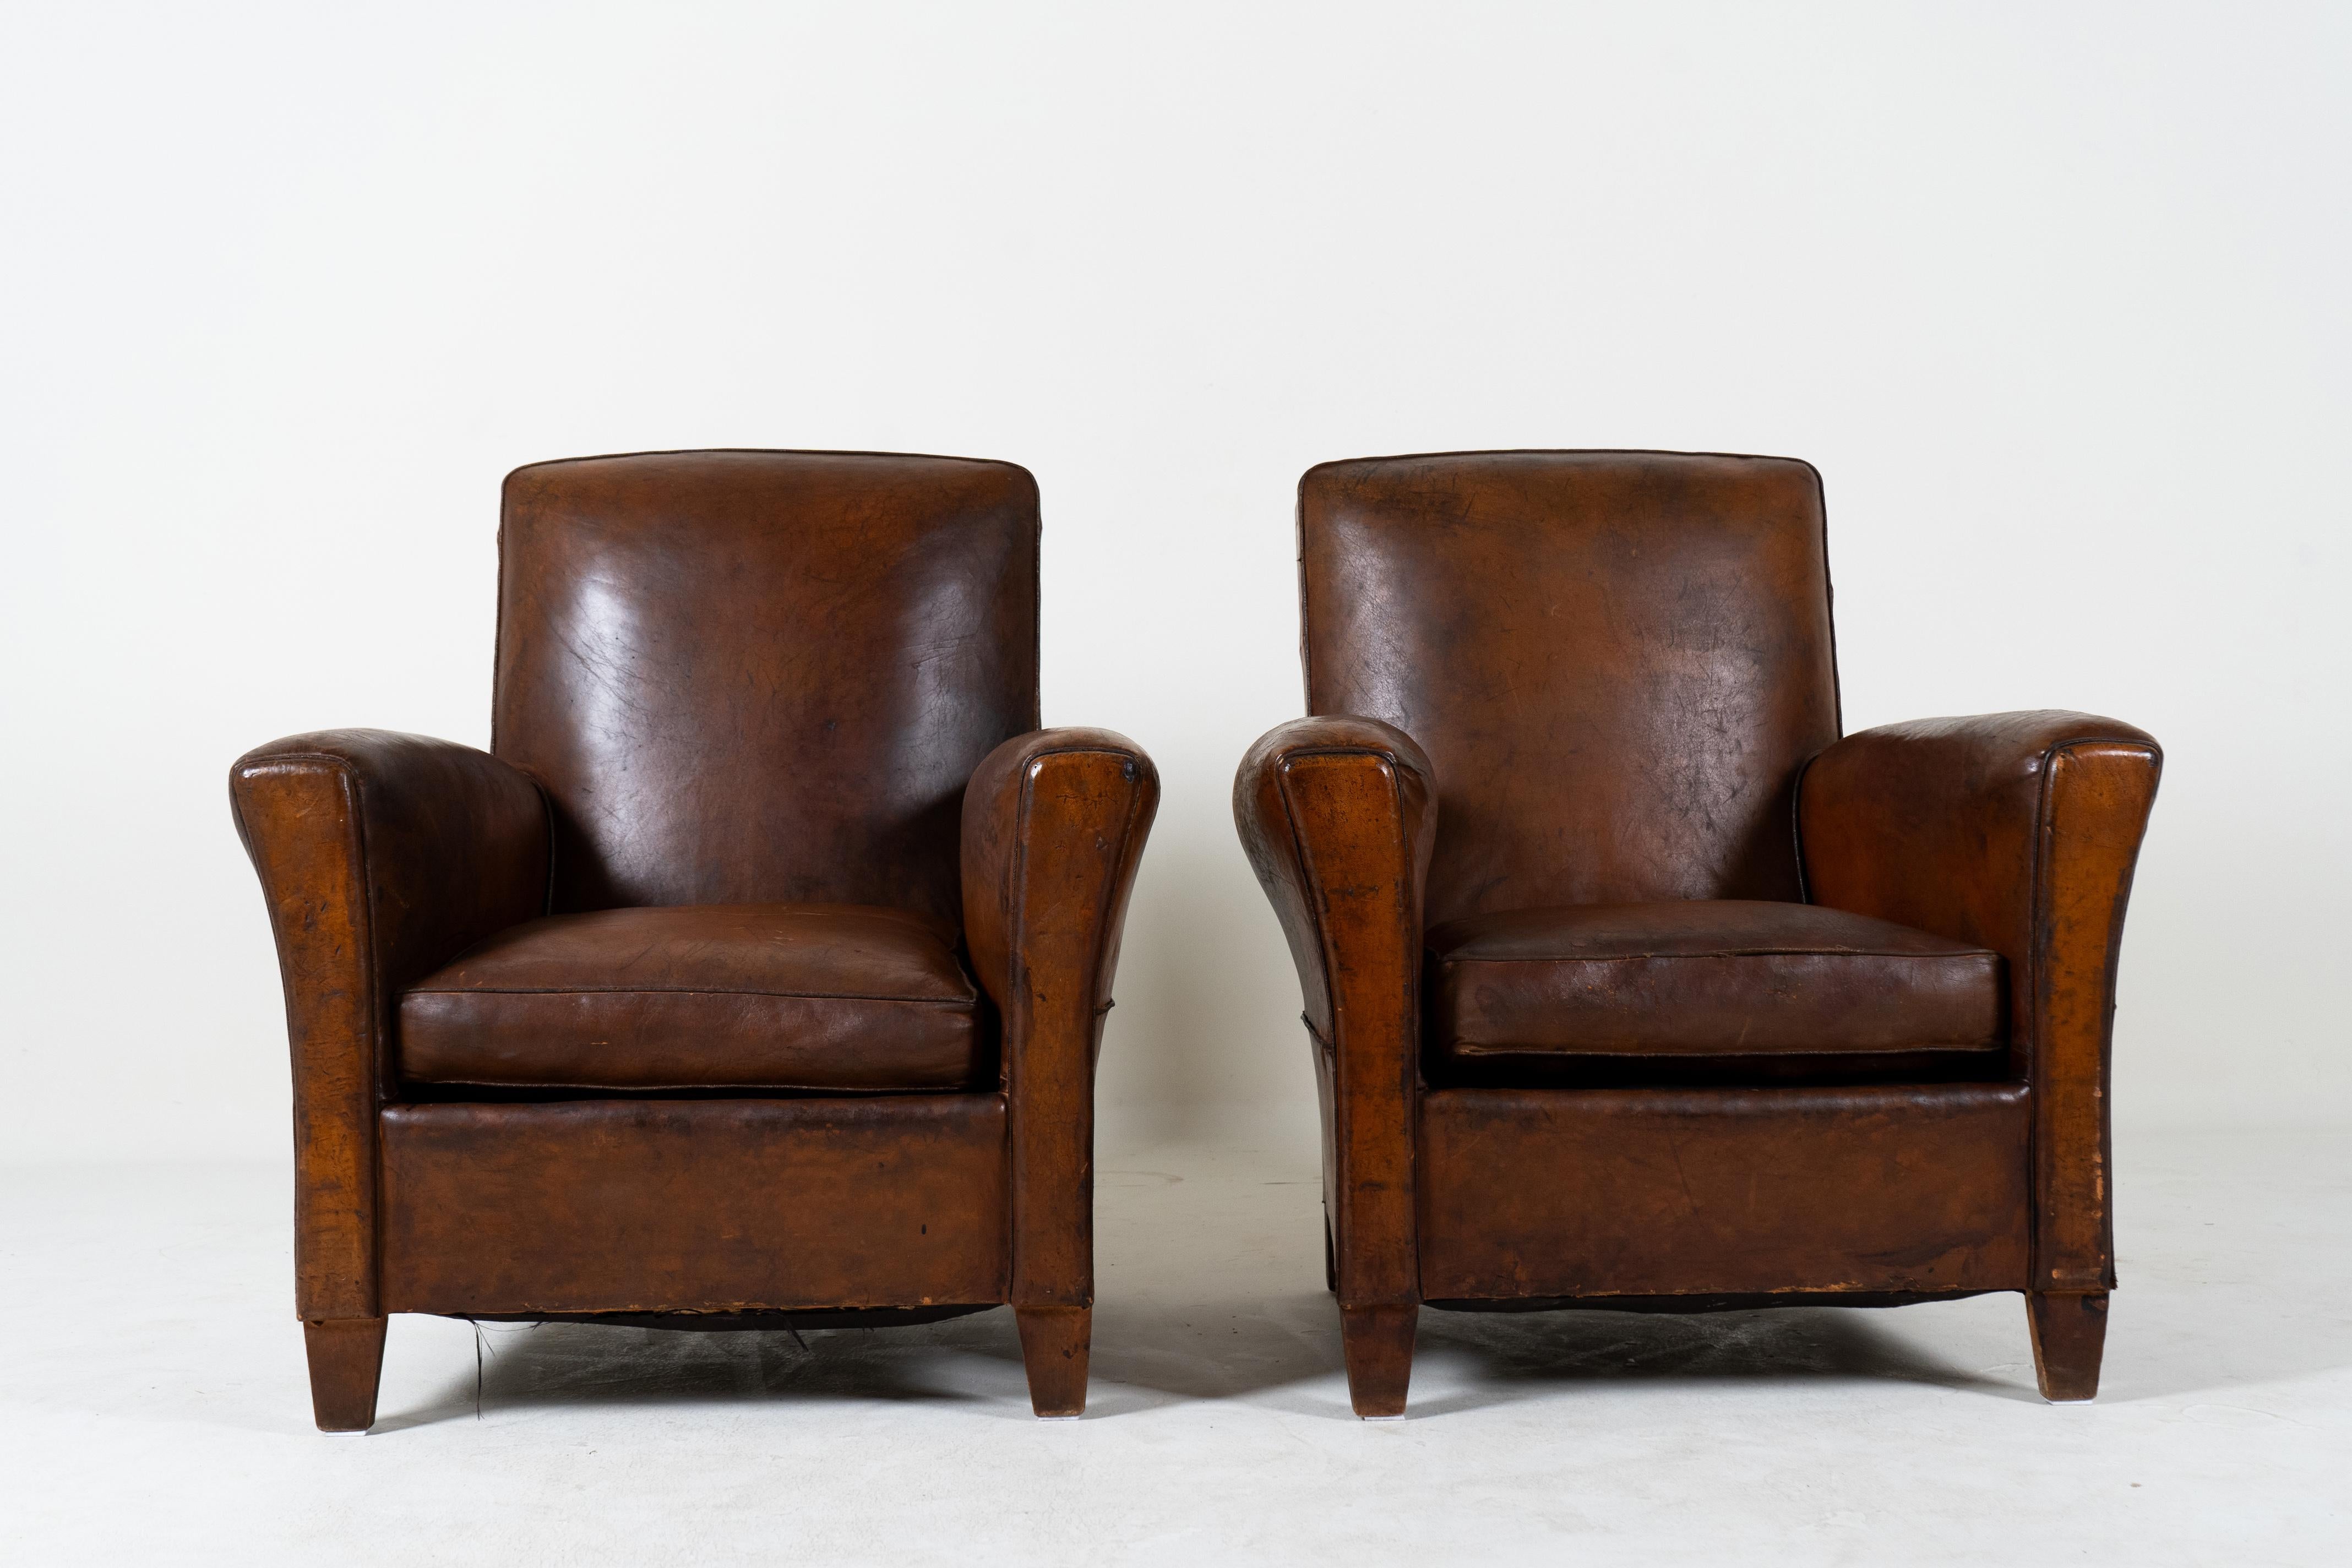 These gracefully-proportioned French leather club chairs have  classic Art Deco lines with gentle outward arching arms and sloping backs.   The chairs are comfortable and perfectly sized to accommodate the greatest range of people. The sheep's